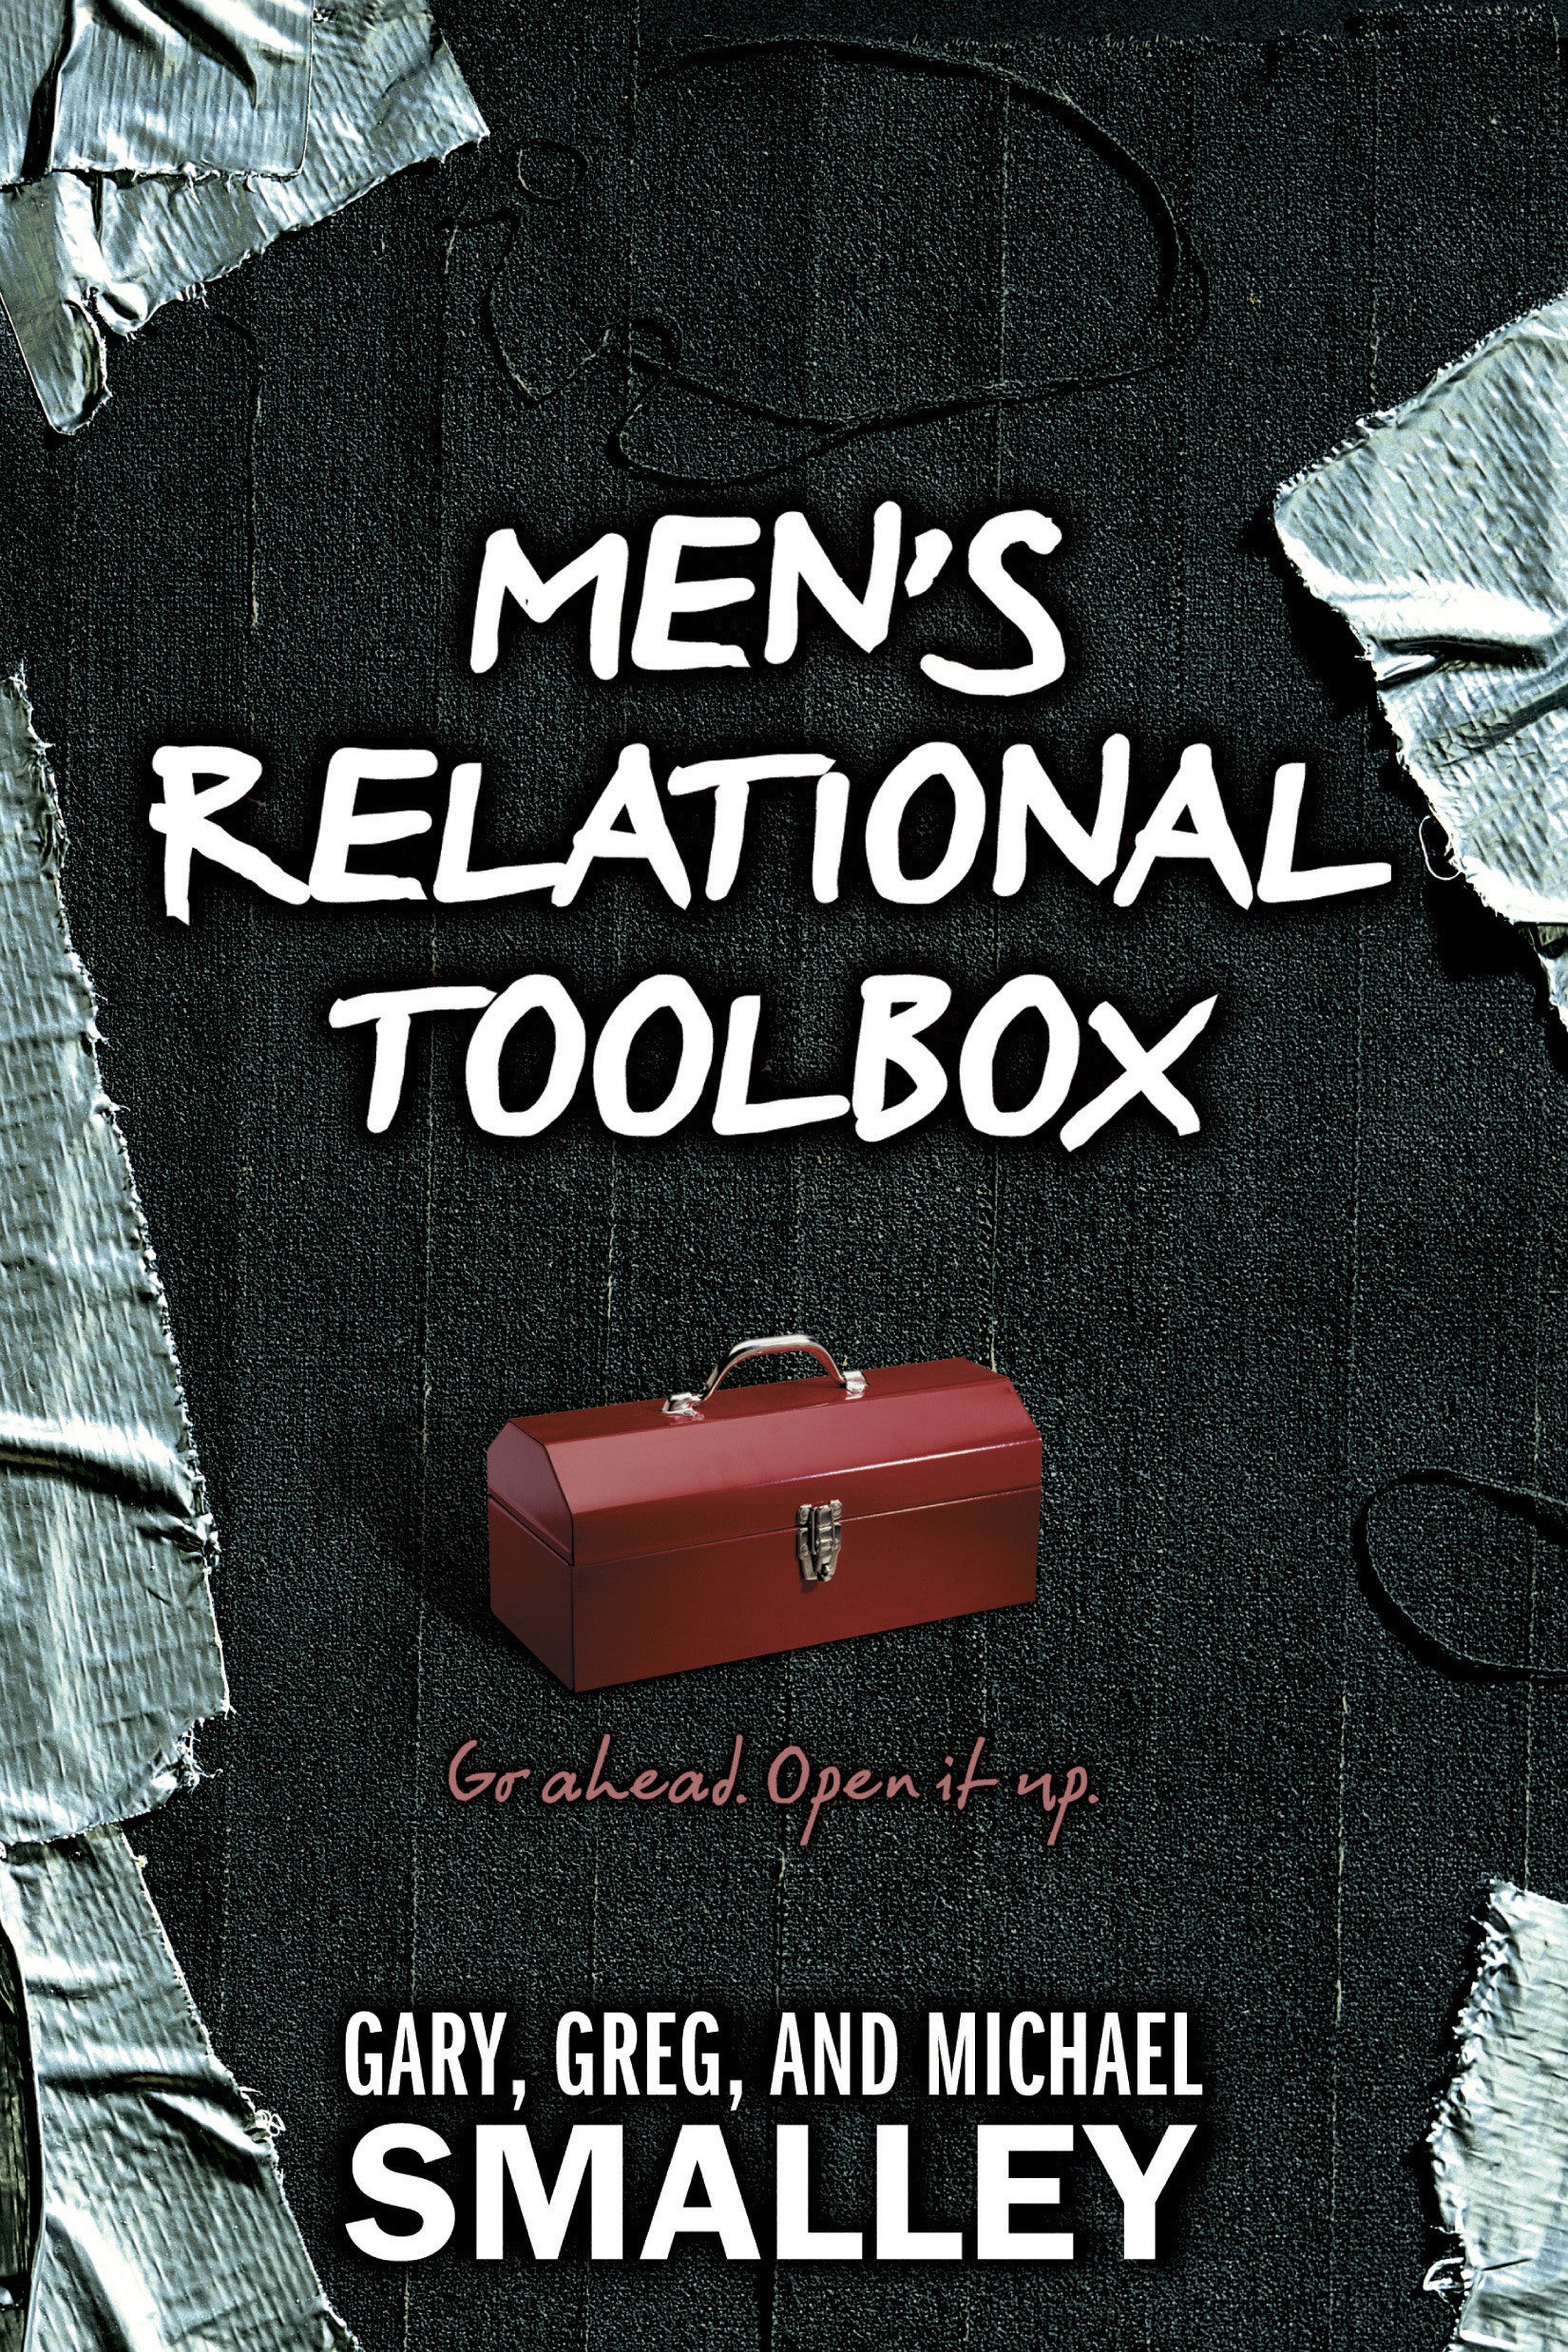 Image of Men's Relational Toolbox other